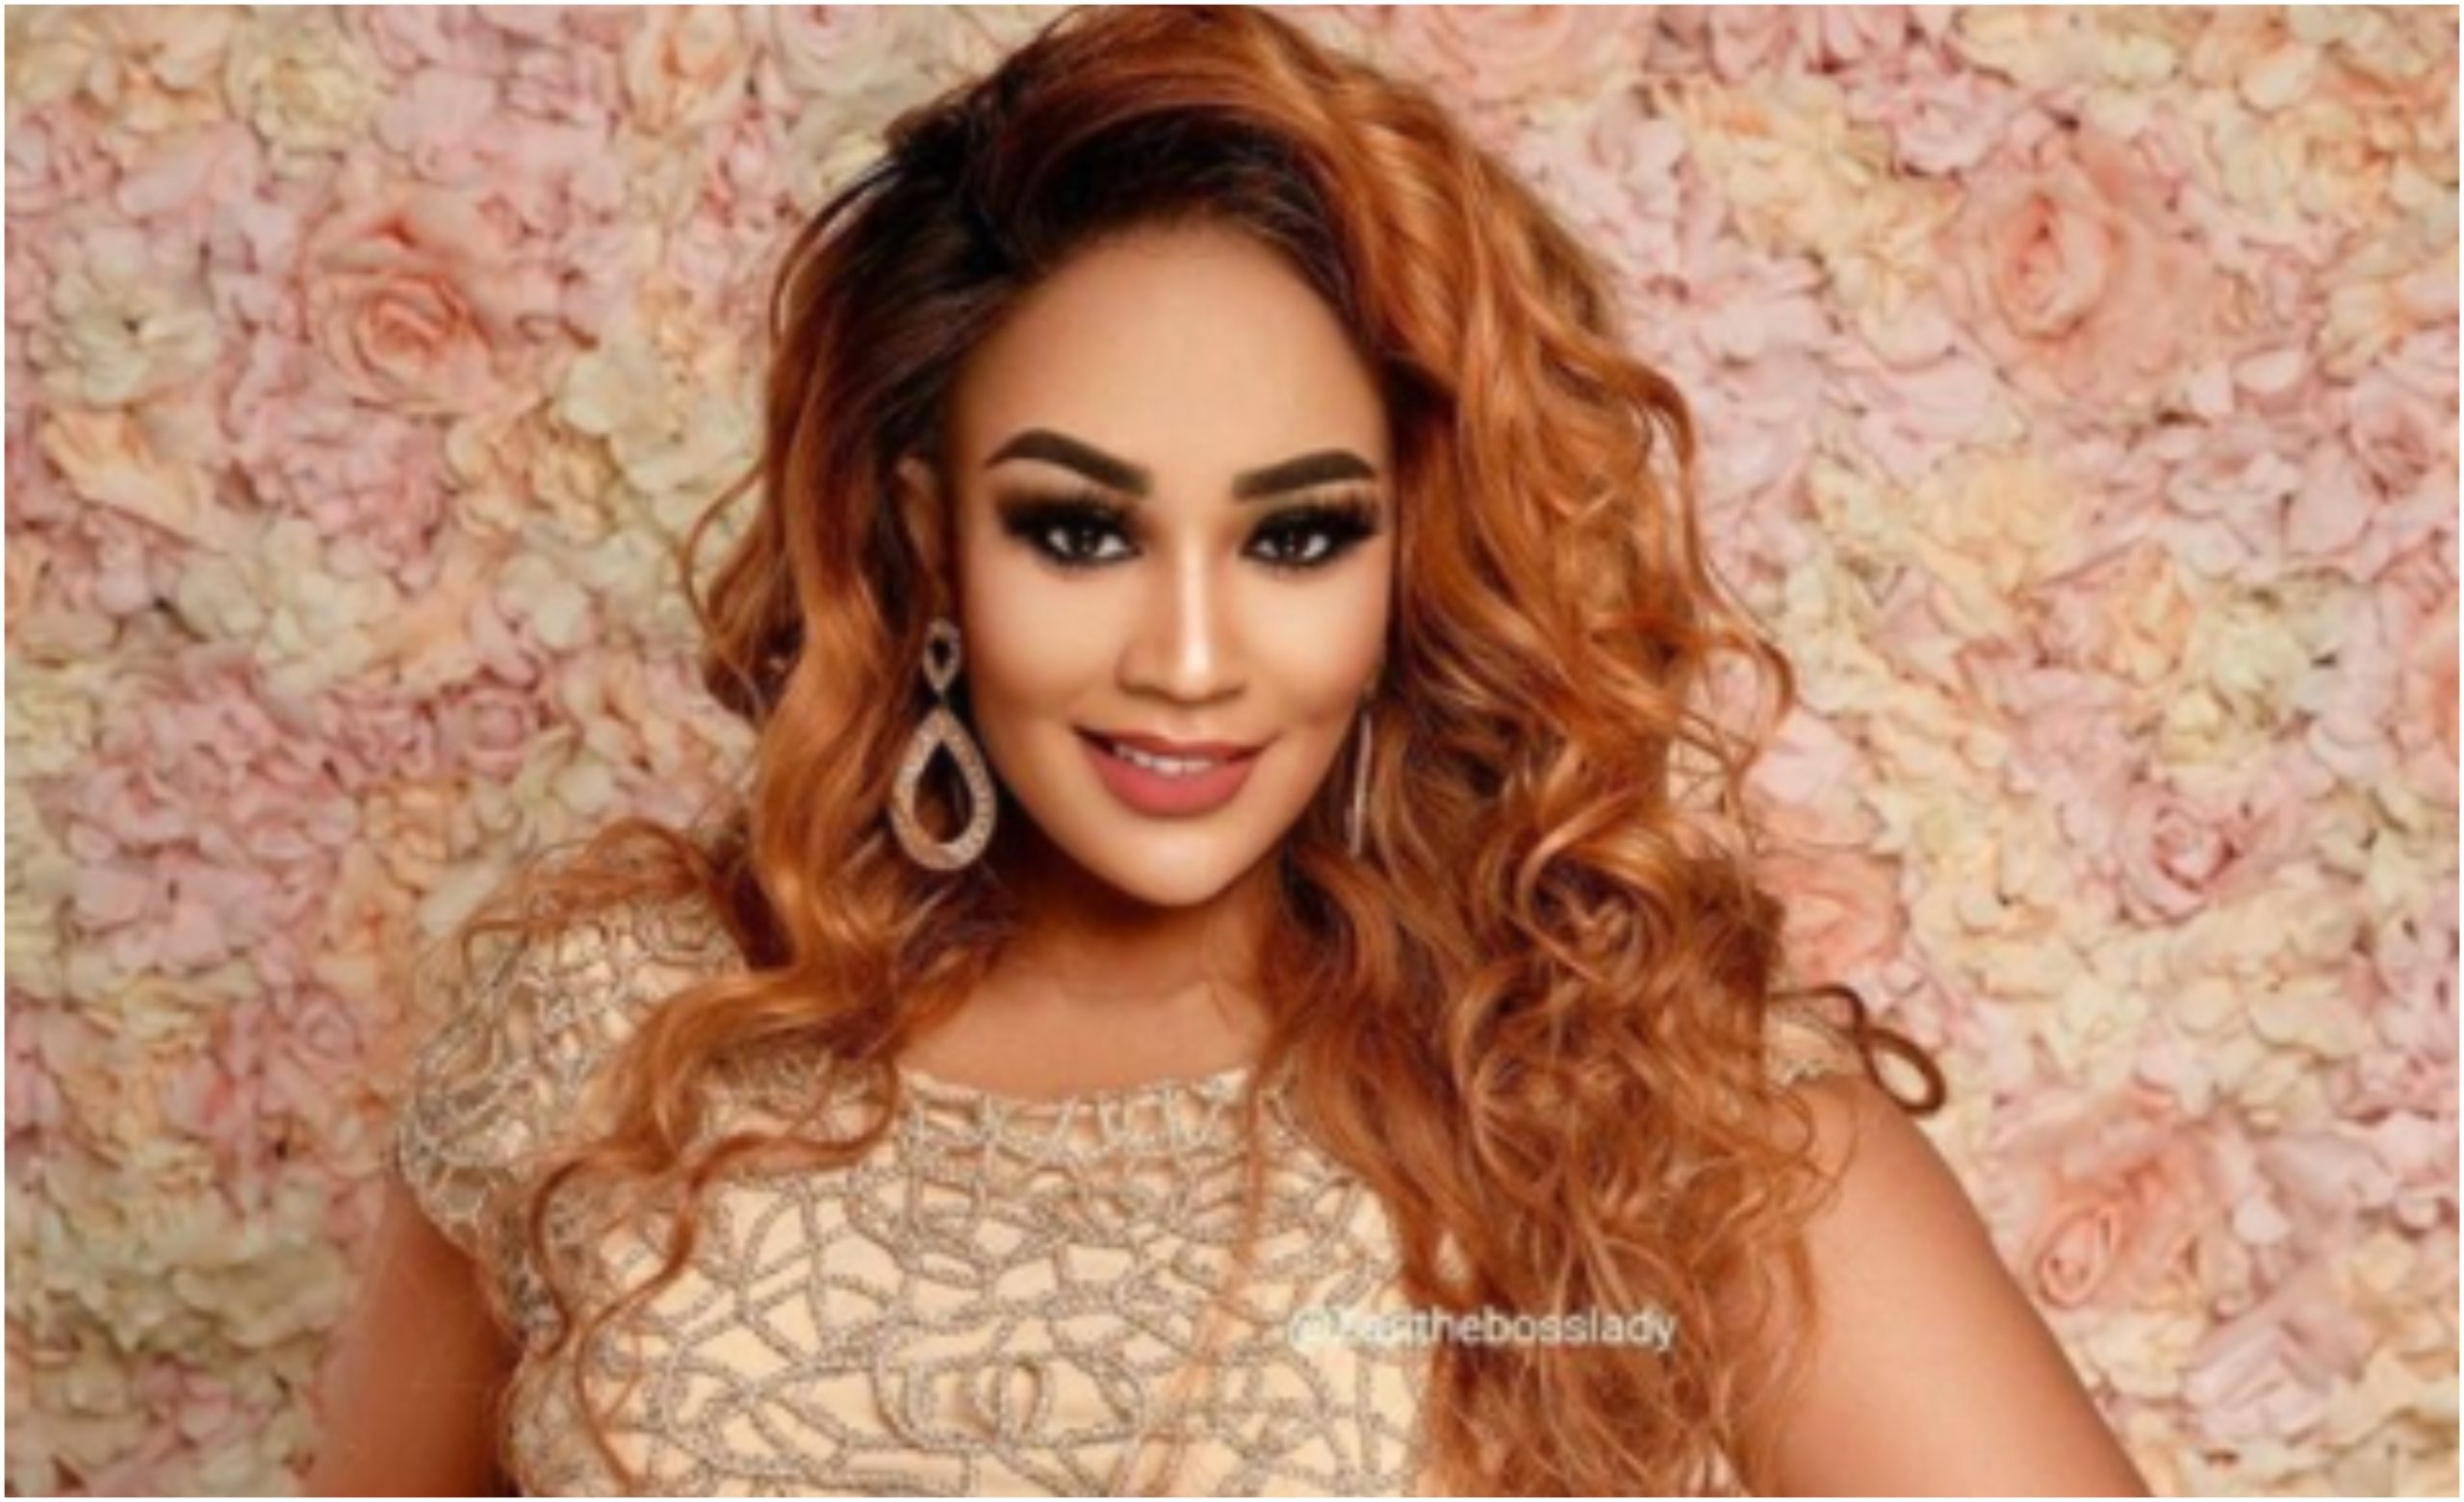 Leaked chats between Zari Hassan and rumored King Bae on her 40th birthday raises speculations (Screenshots)